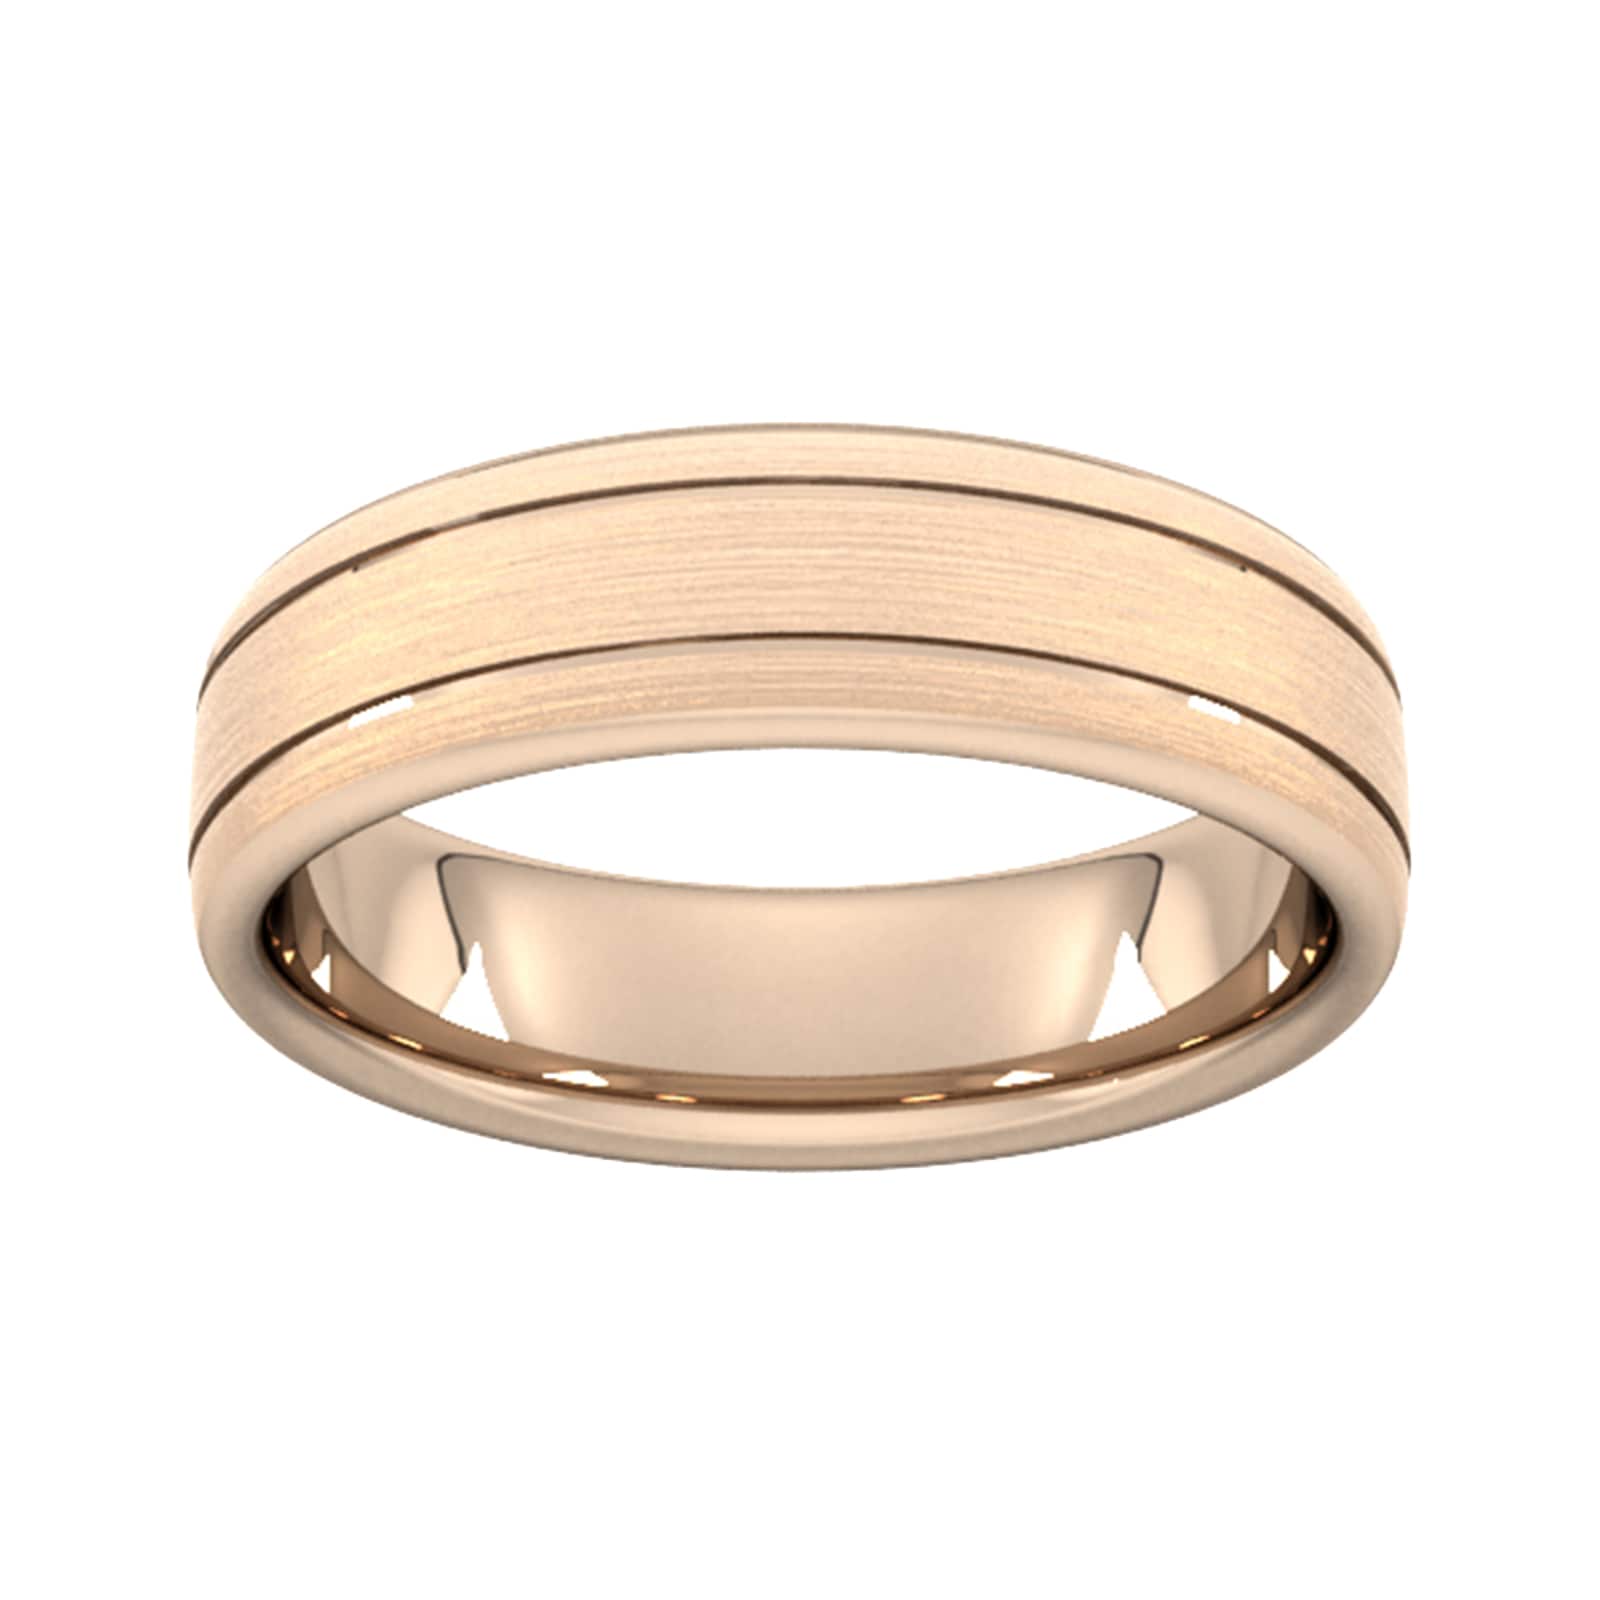 6mm Slight Court Heavy Matt Finish With Double Grooves Wedding Ring In 18 Carat Rose Gold - Ring Size R